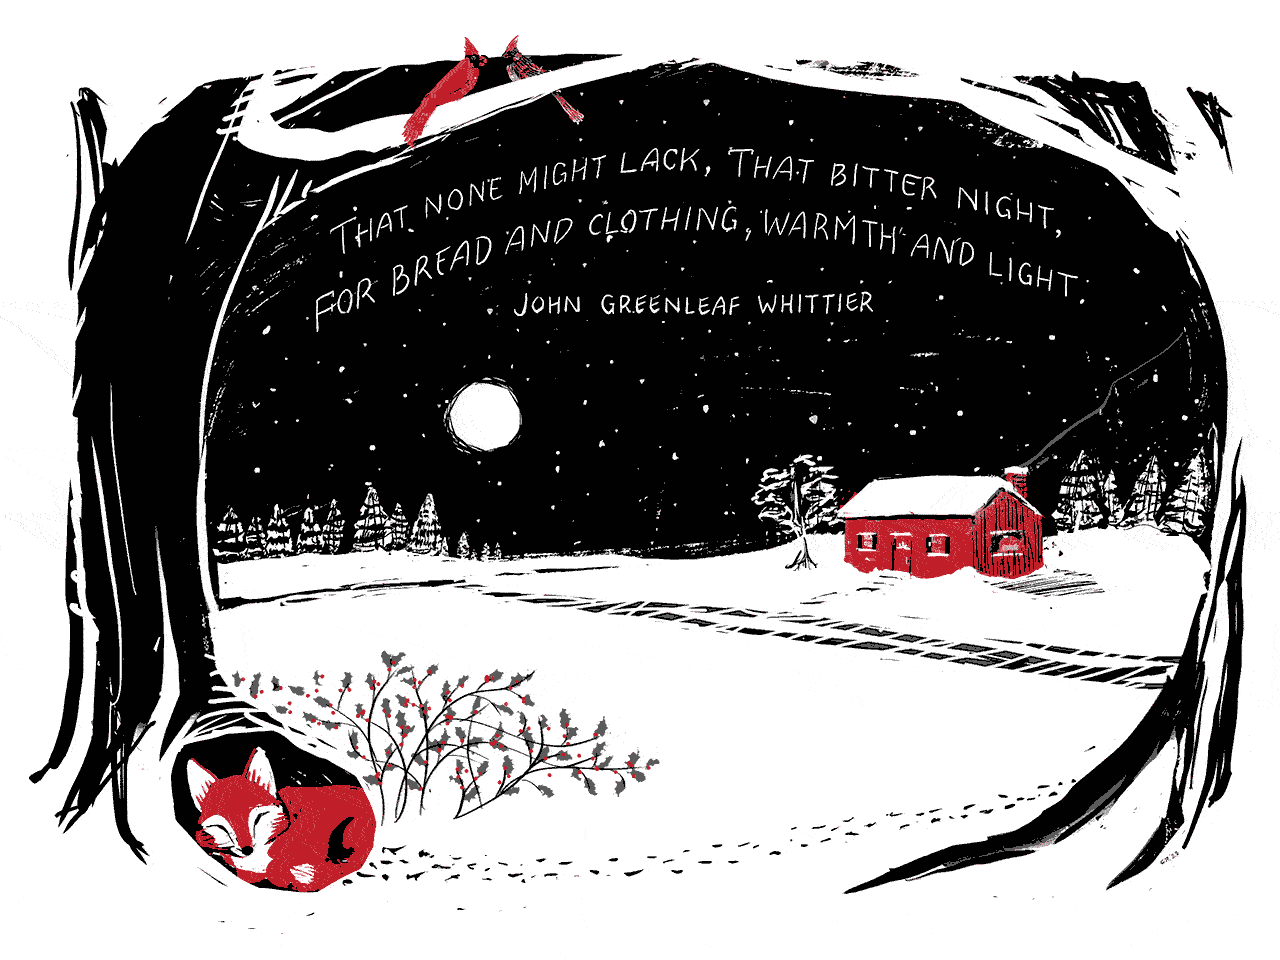 Black and white holiday card with snow falling at night in an open field.